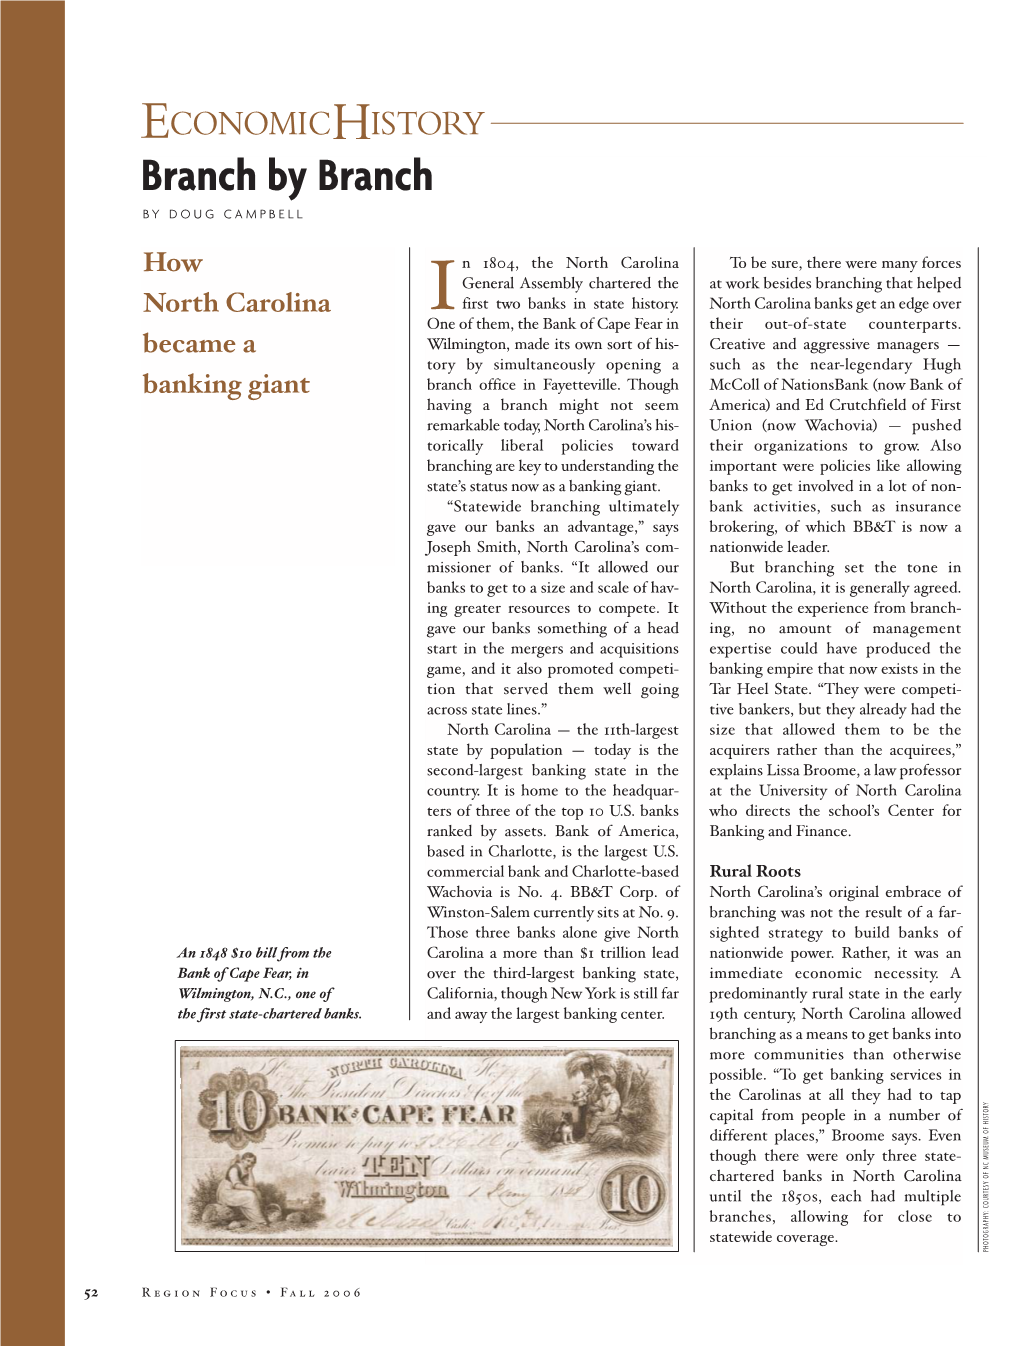 Branch by Branch: How North Carolina Became a Banking Giant